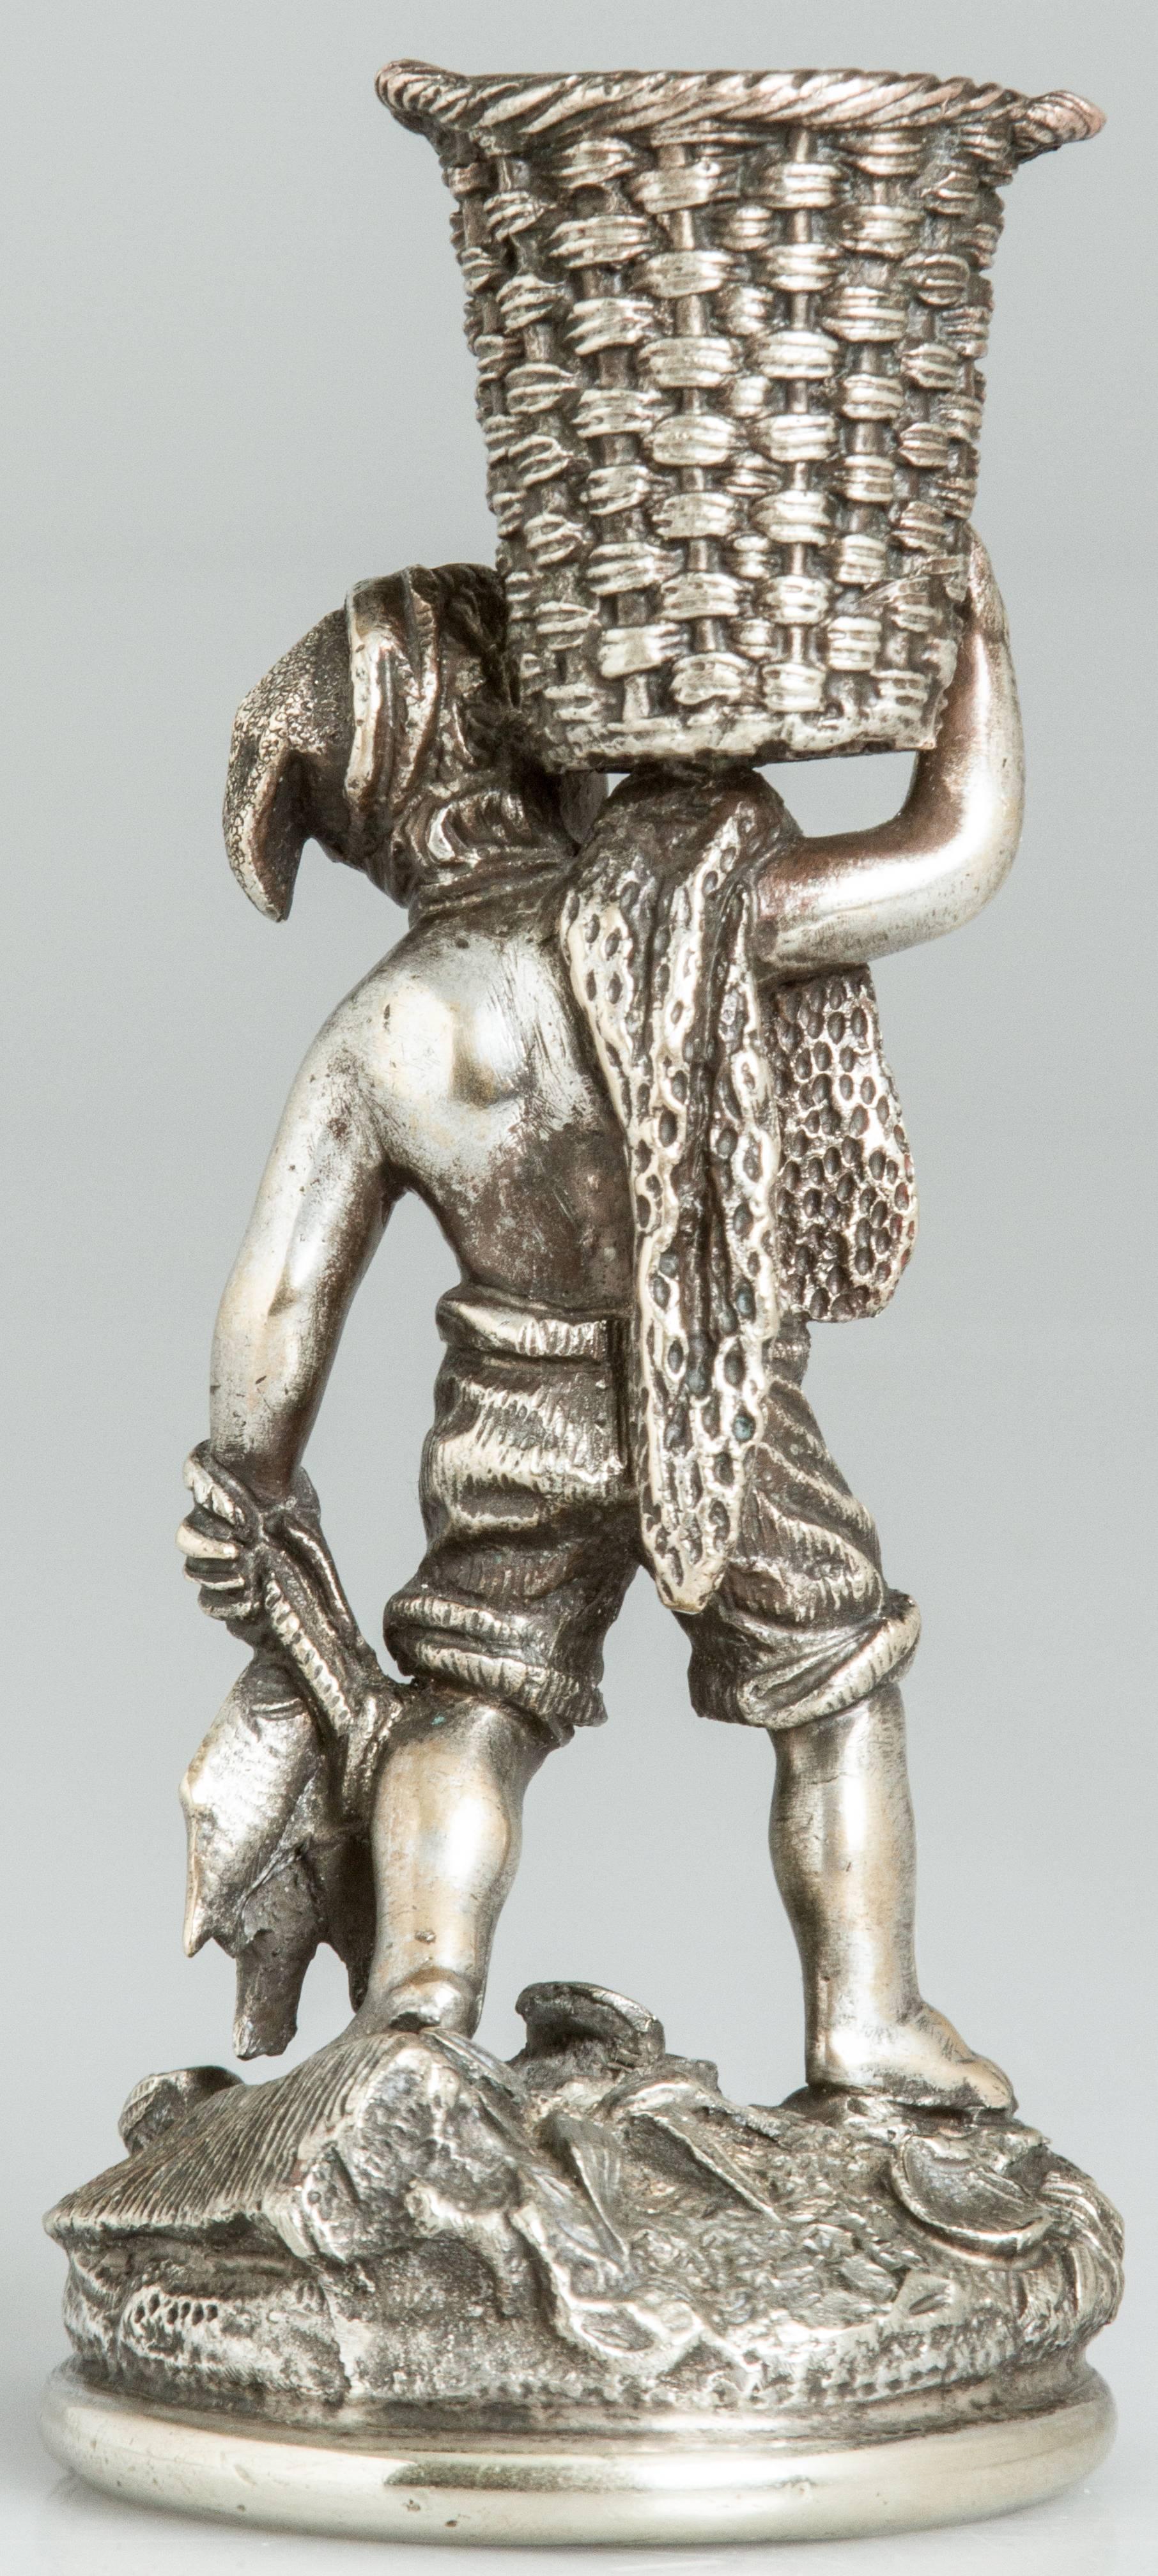 A young fisherman with a basket atop his head is holding a string of fish with various shells at his feet.
The basket holds the matches and the striker is on the base.